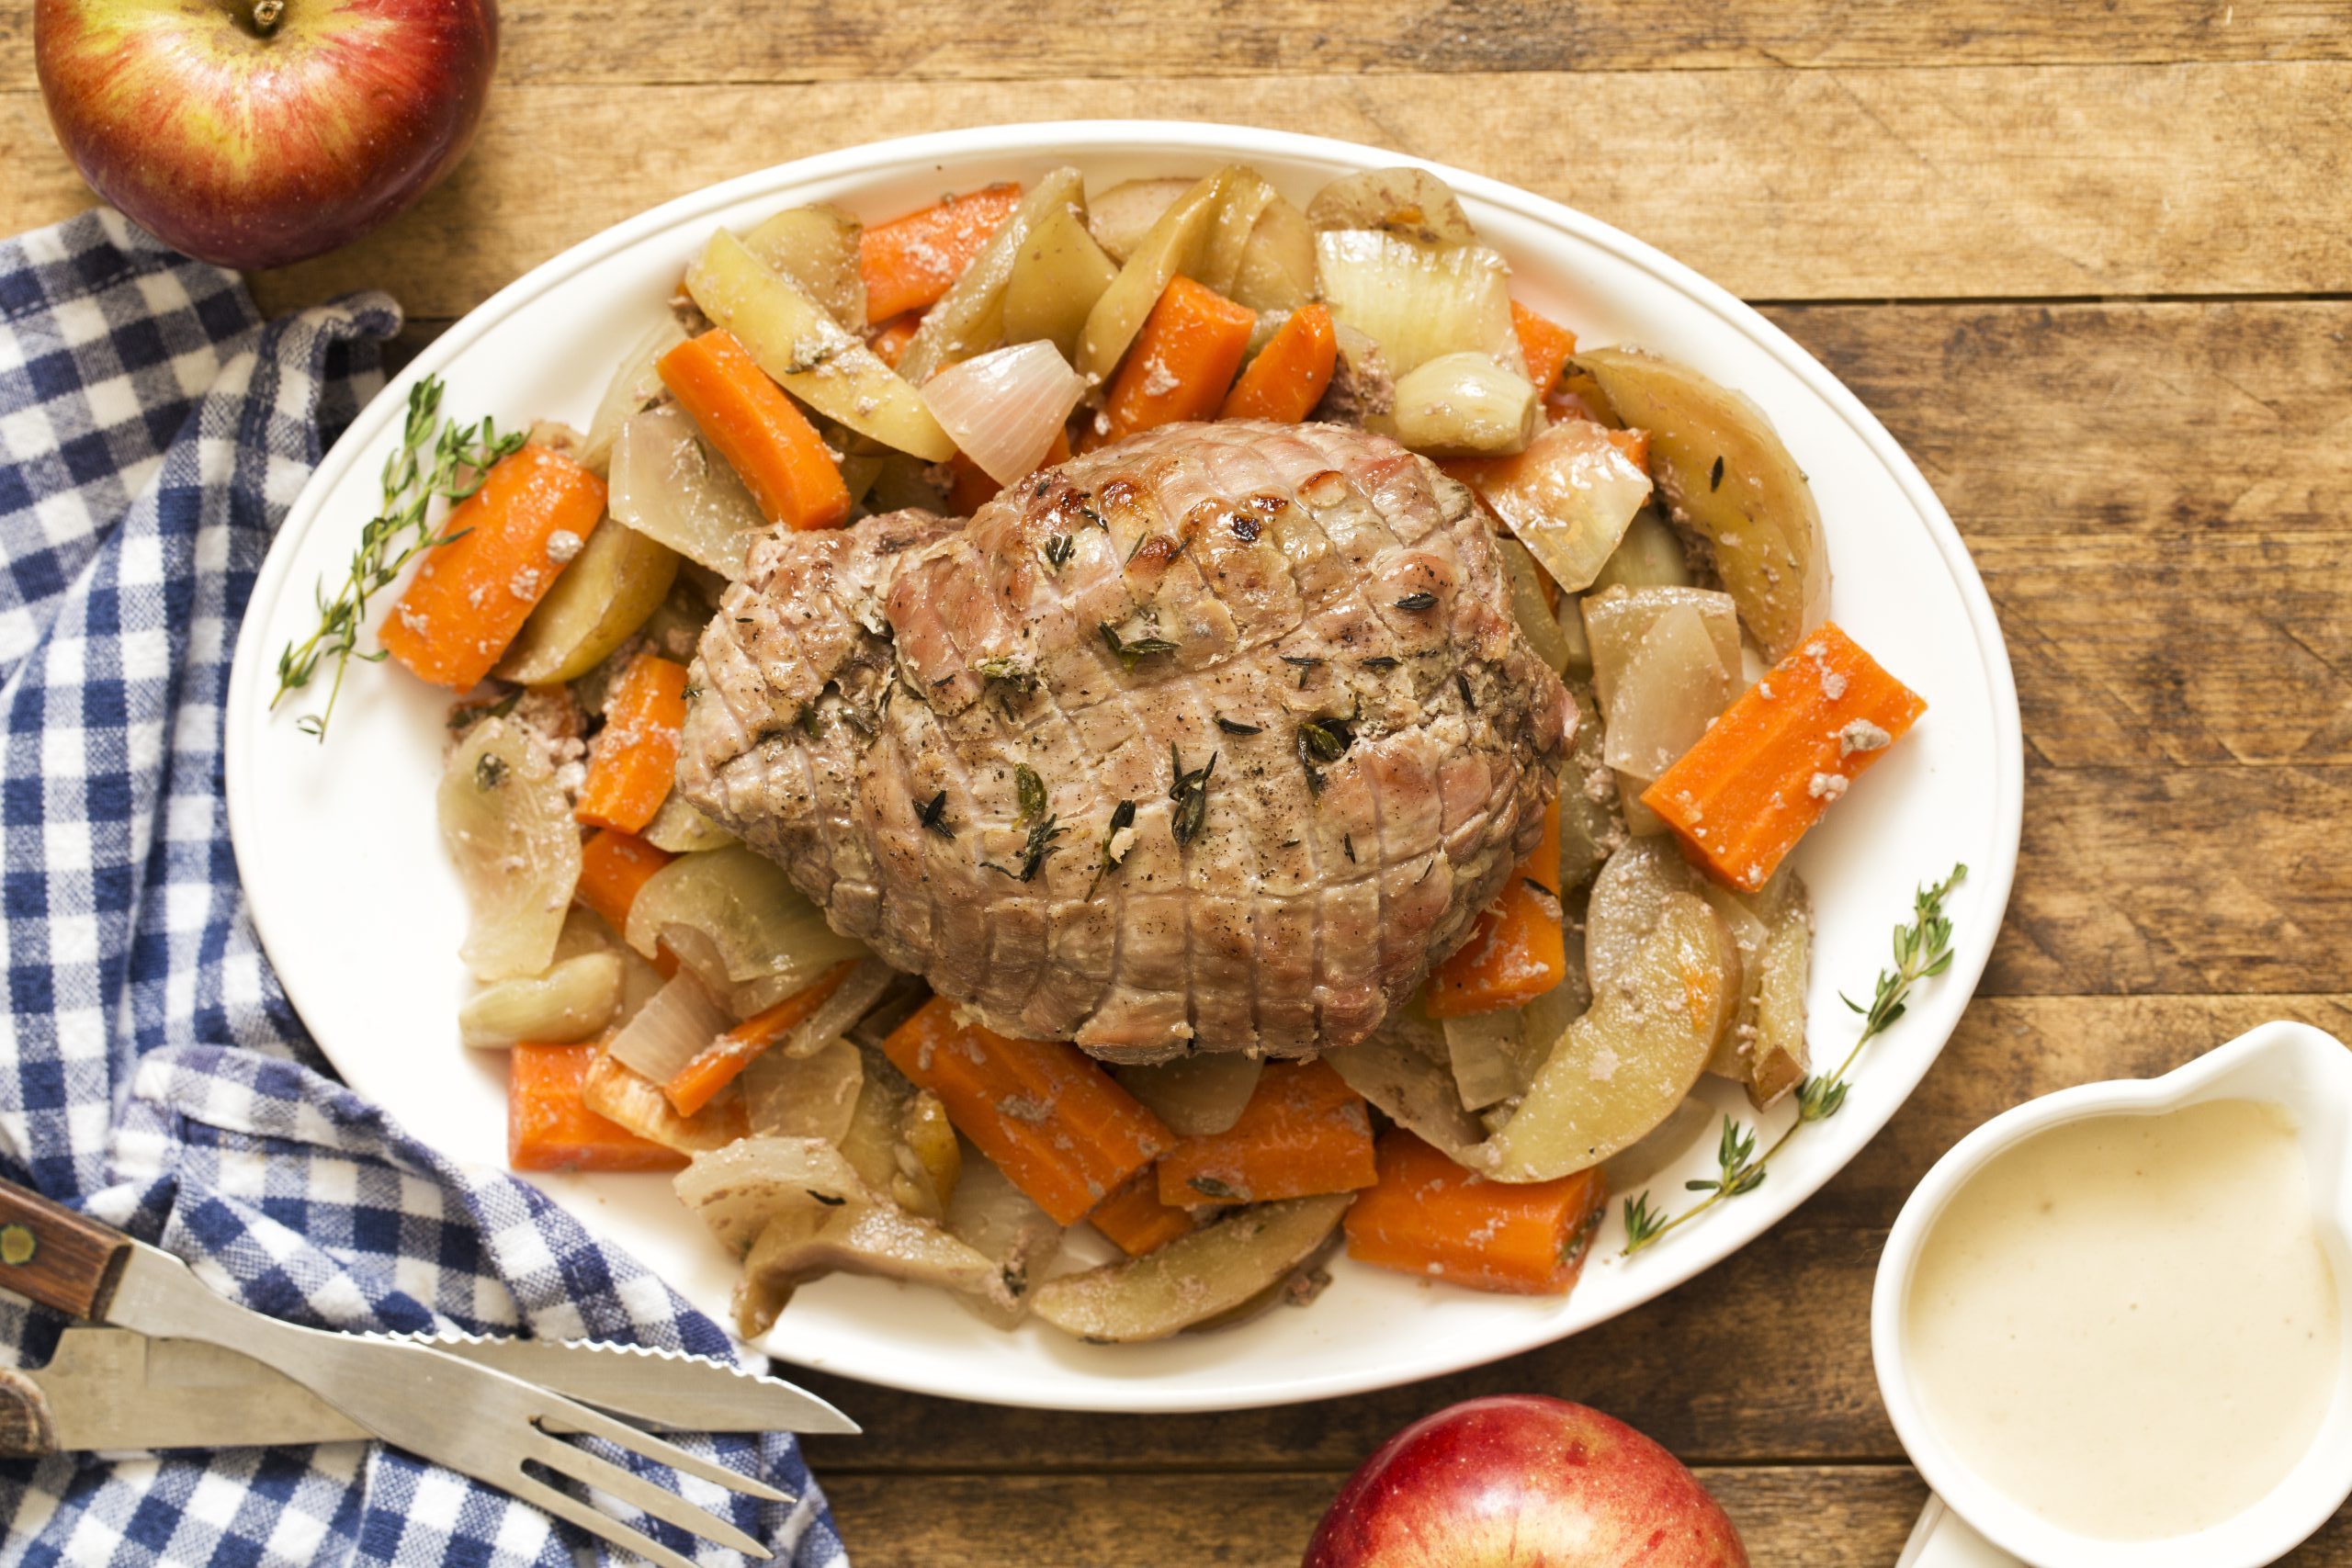 Autumn Veal Roast with Apples, Thyme, and Carrots background image